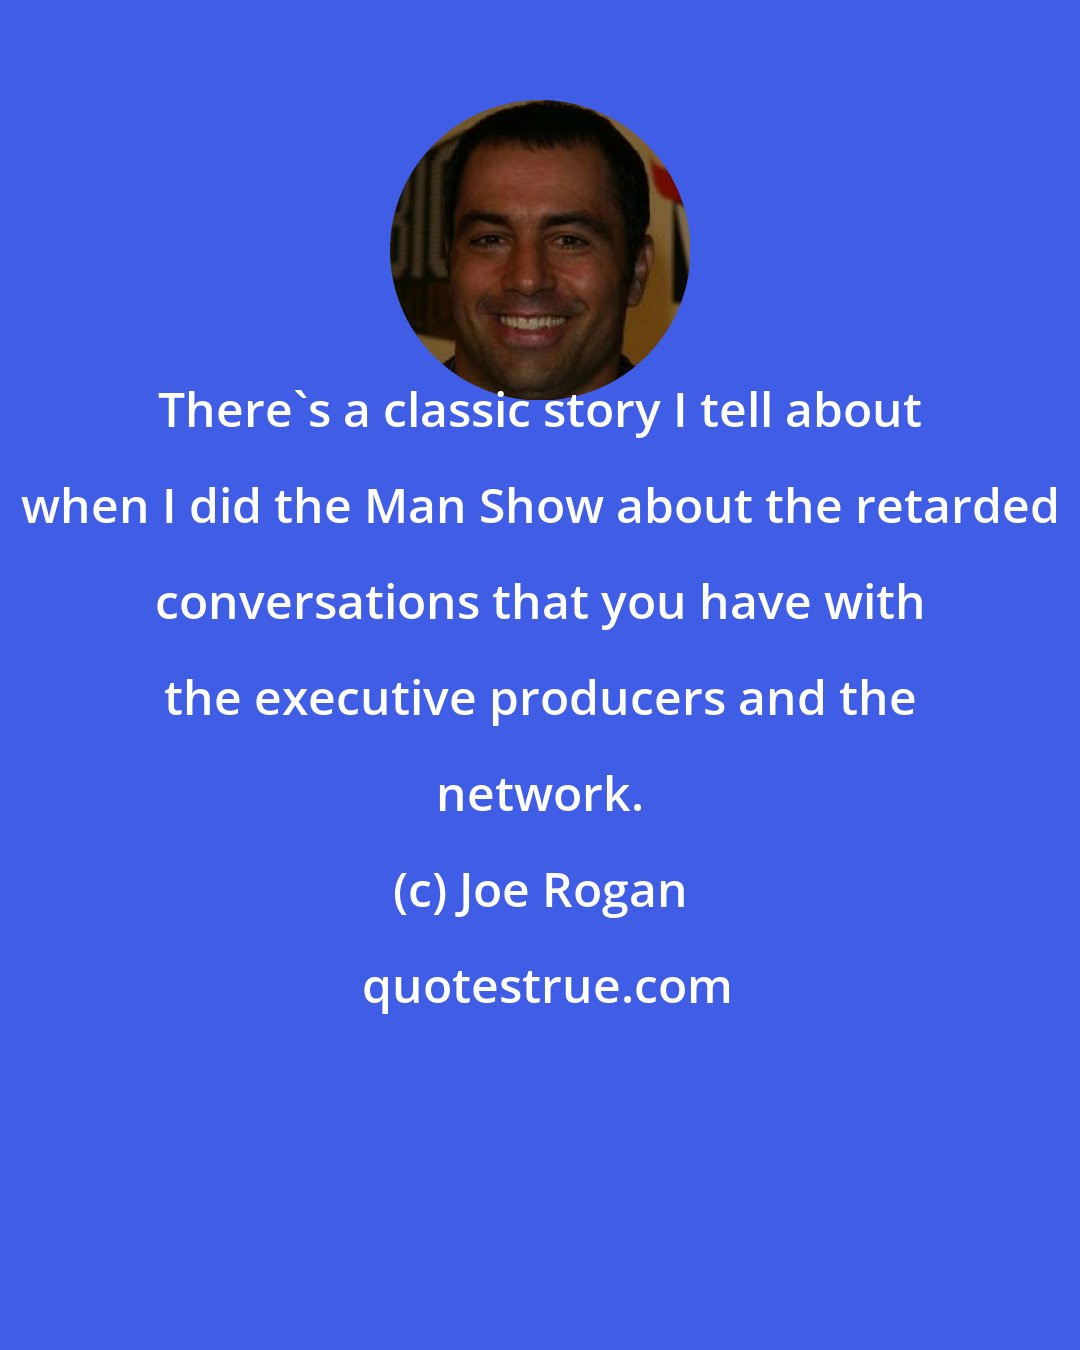 Joe Rogan: There's a classic story I tell about when I did the Man Show about the retarded conversations that you have with the executive producers and the network.